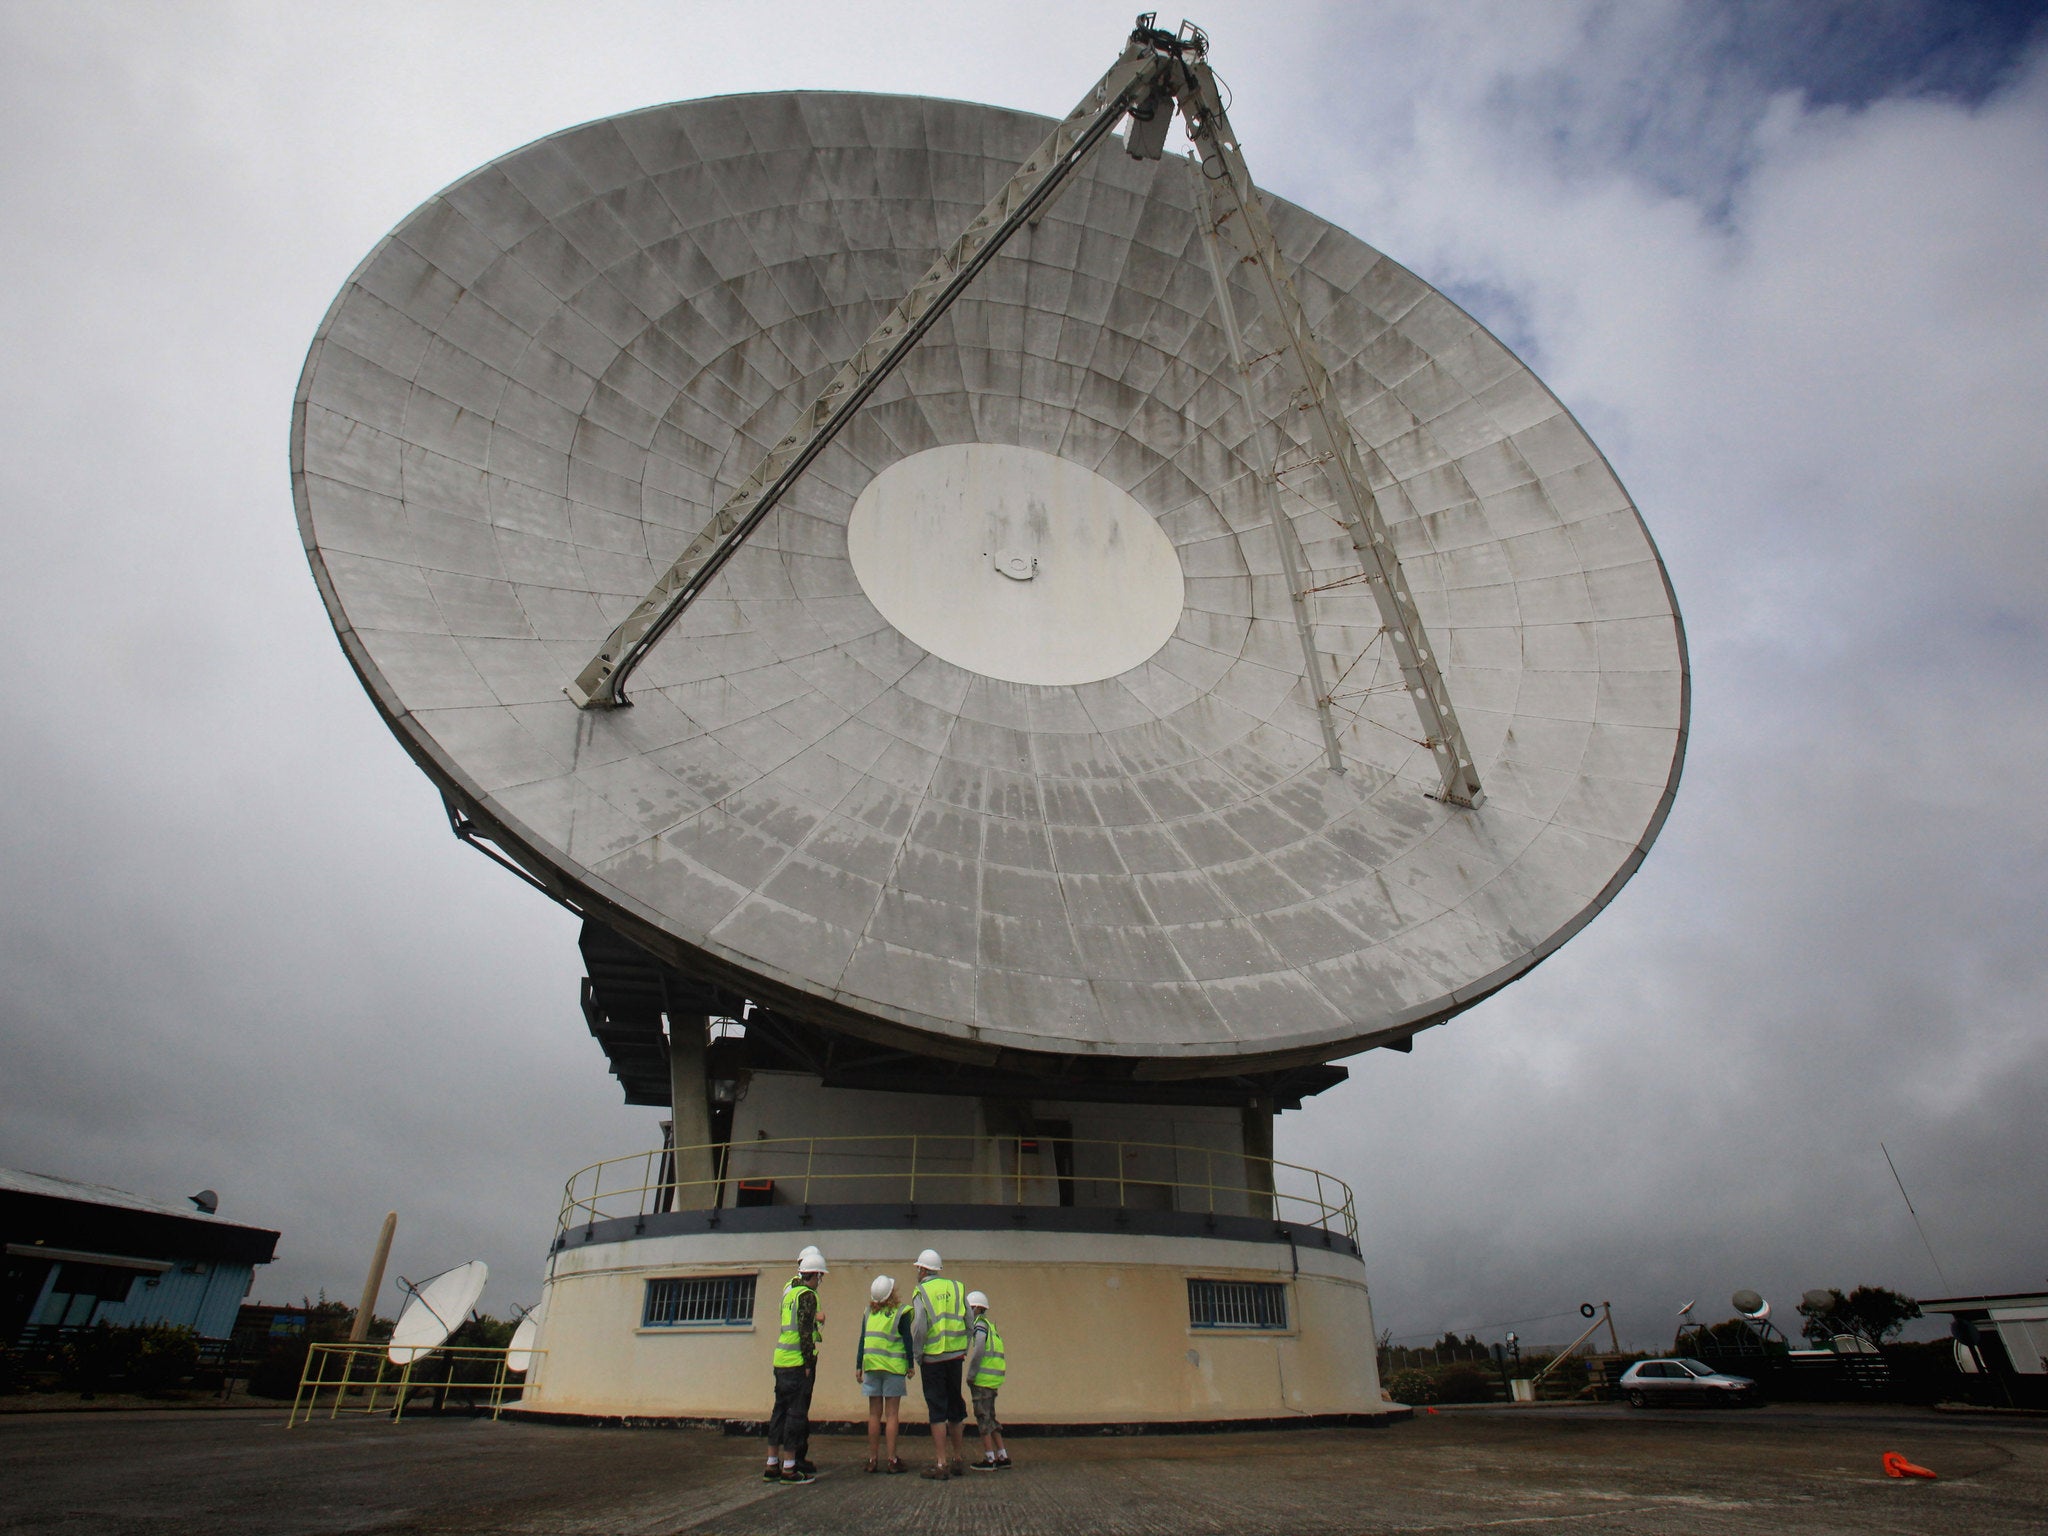 The crash happened near the Goonhilly Satellite Earth Station in Helston, Cornwall